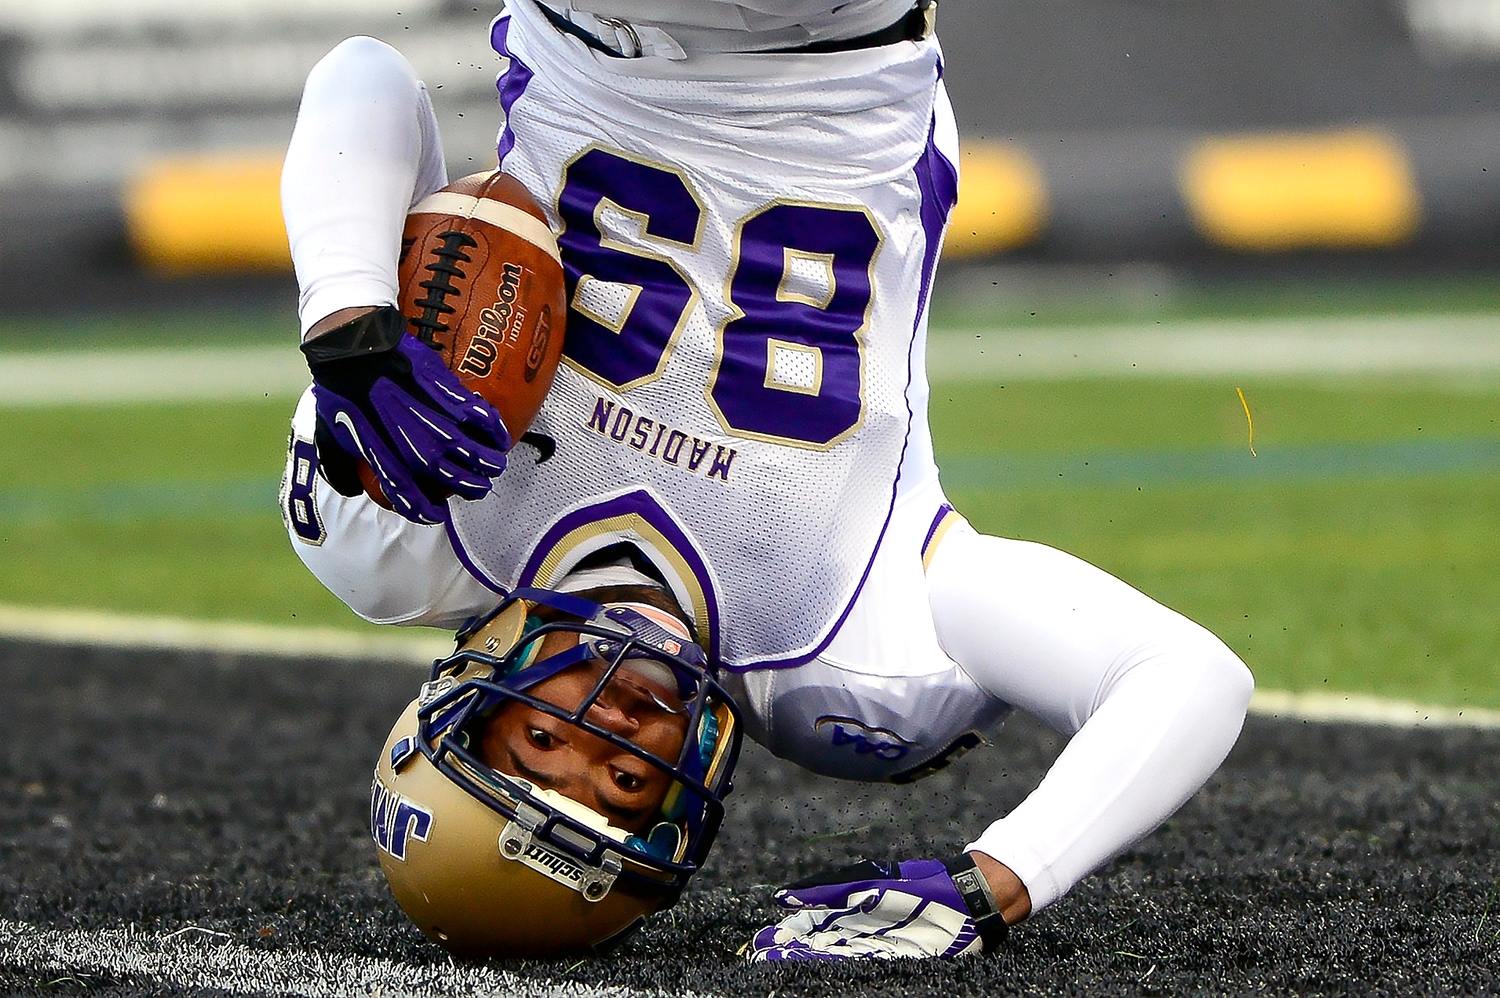  James Madison University wide receiver Anthony Rose slides on his head into the end zone to put JMU up 7-0 in the first quarter on Nov. 23, 2013 in Baltimore, Md. 